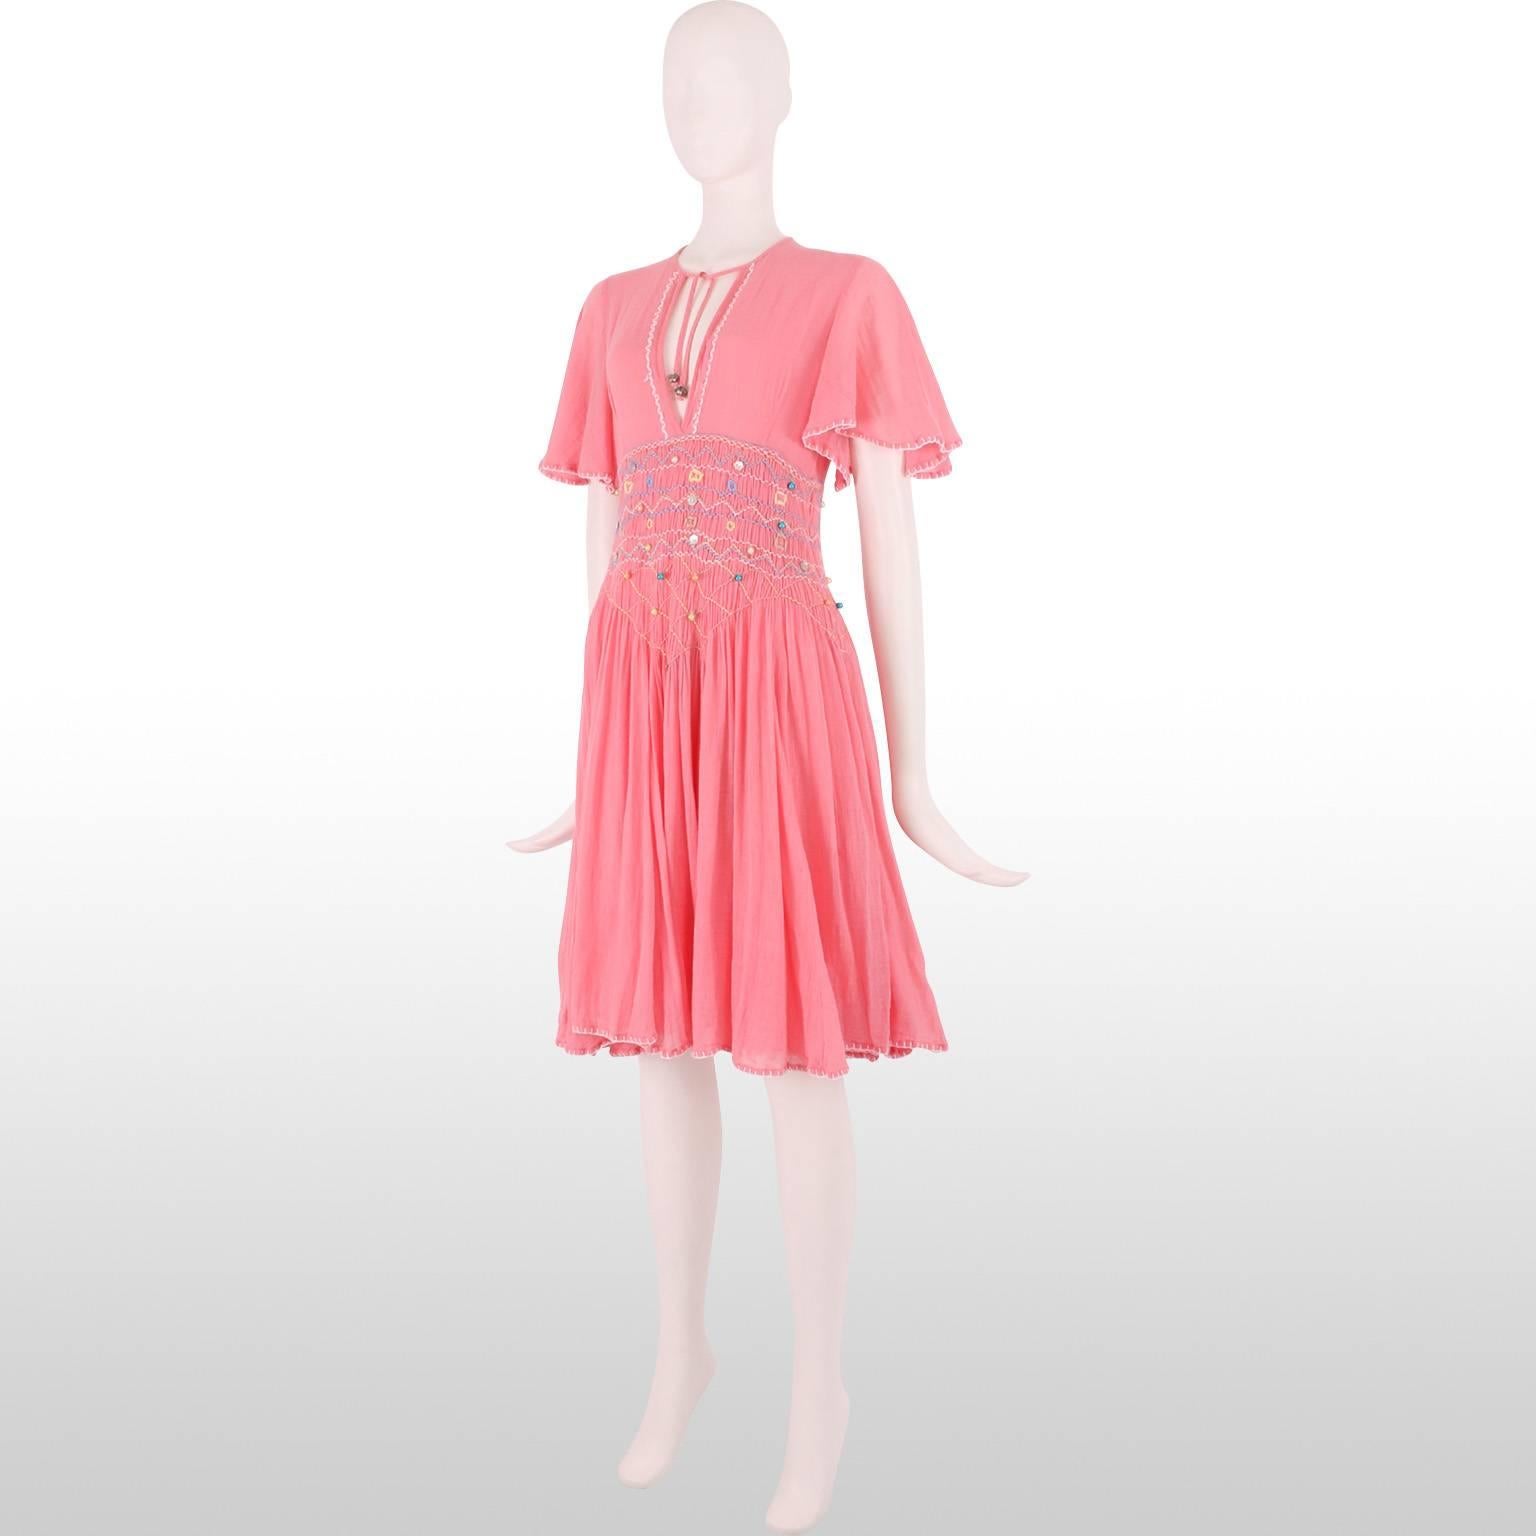 Matthew Williamson Bubblegum Pink Summer Dress with Beaded Embroidery UK 10 In Good Condition For Sale In London, GB